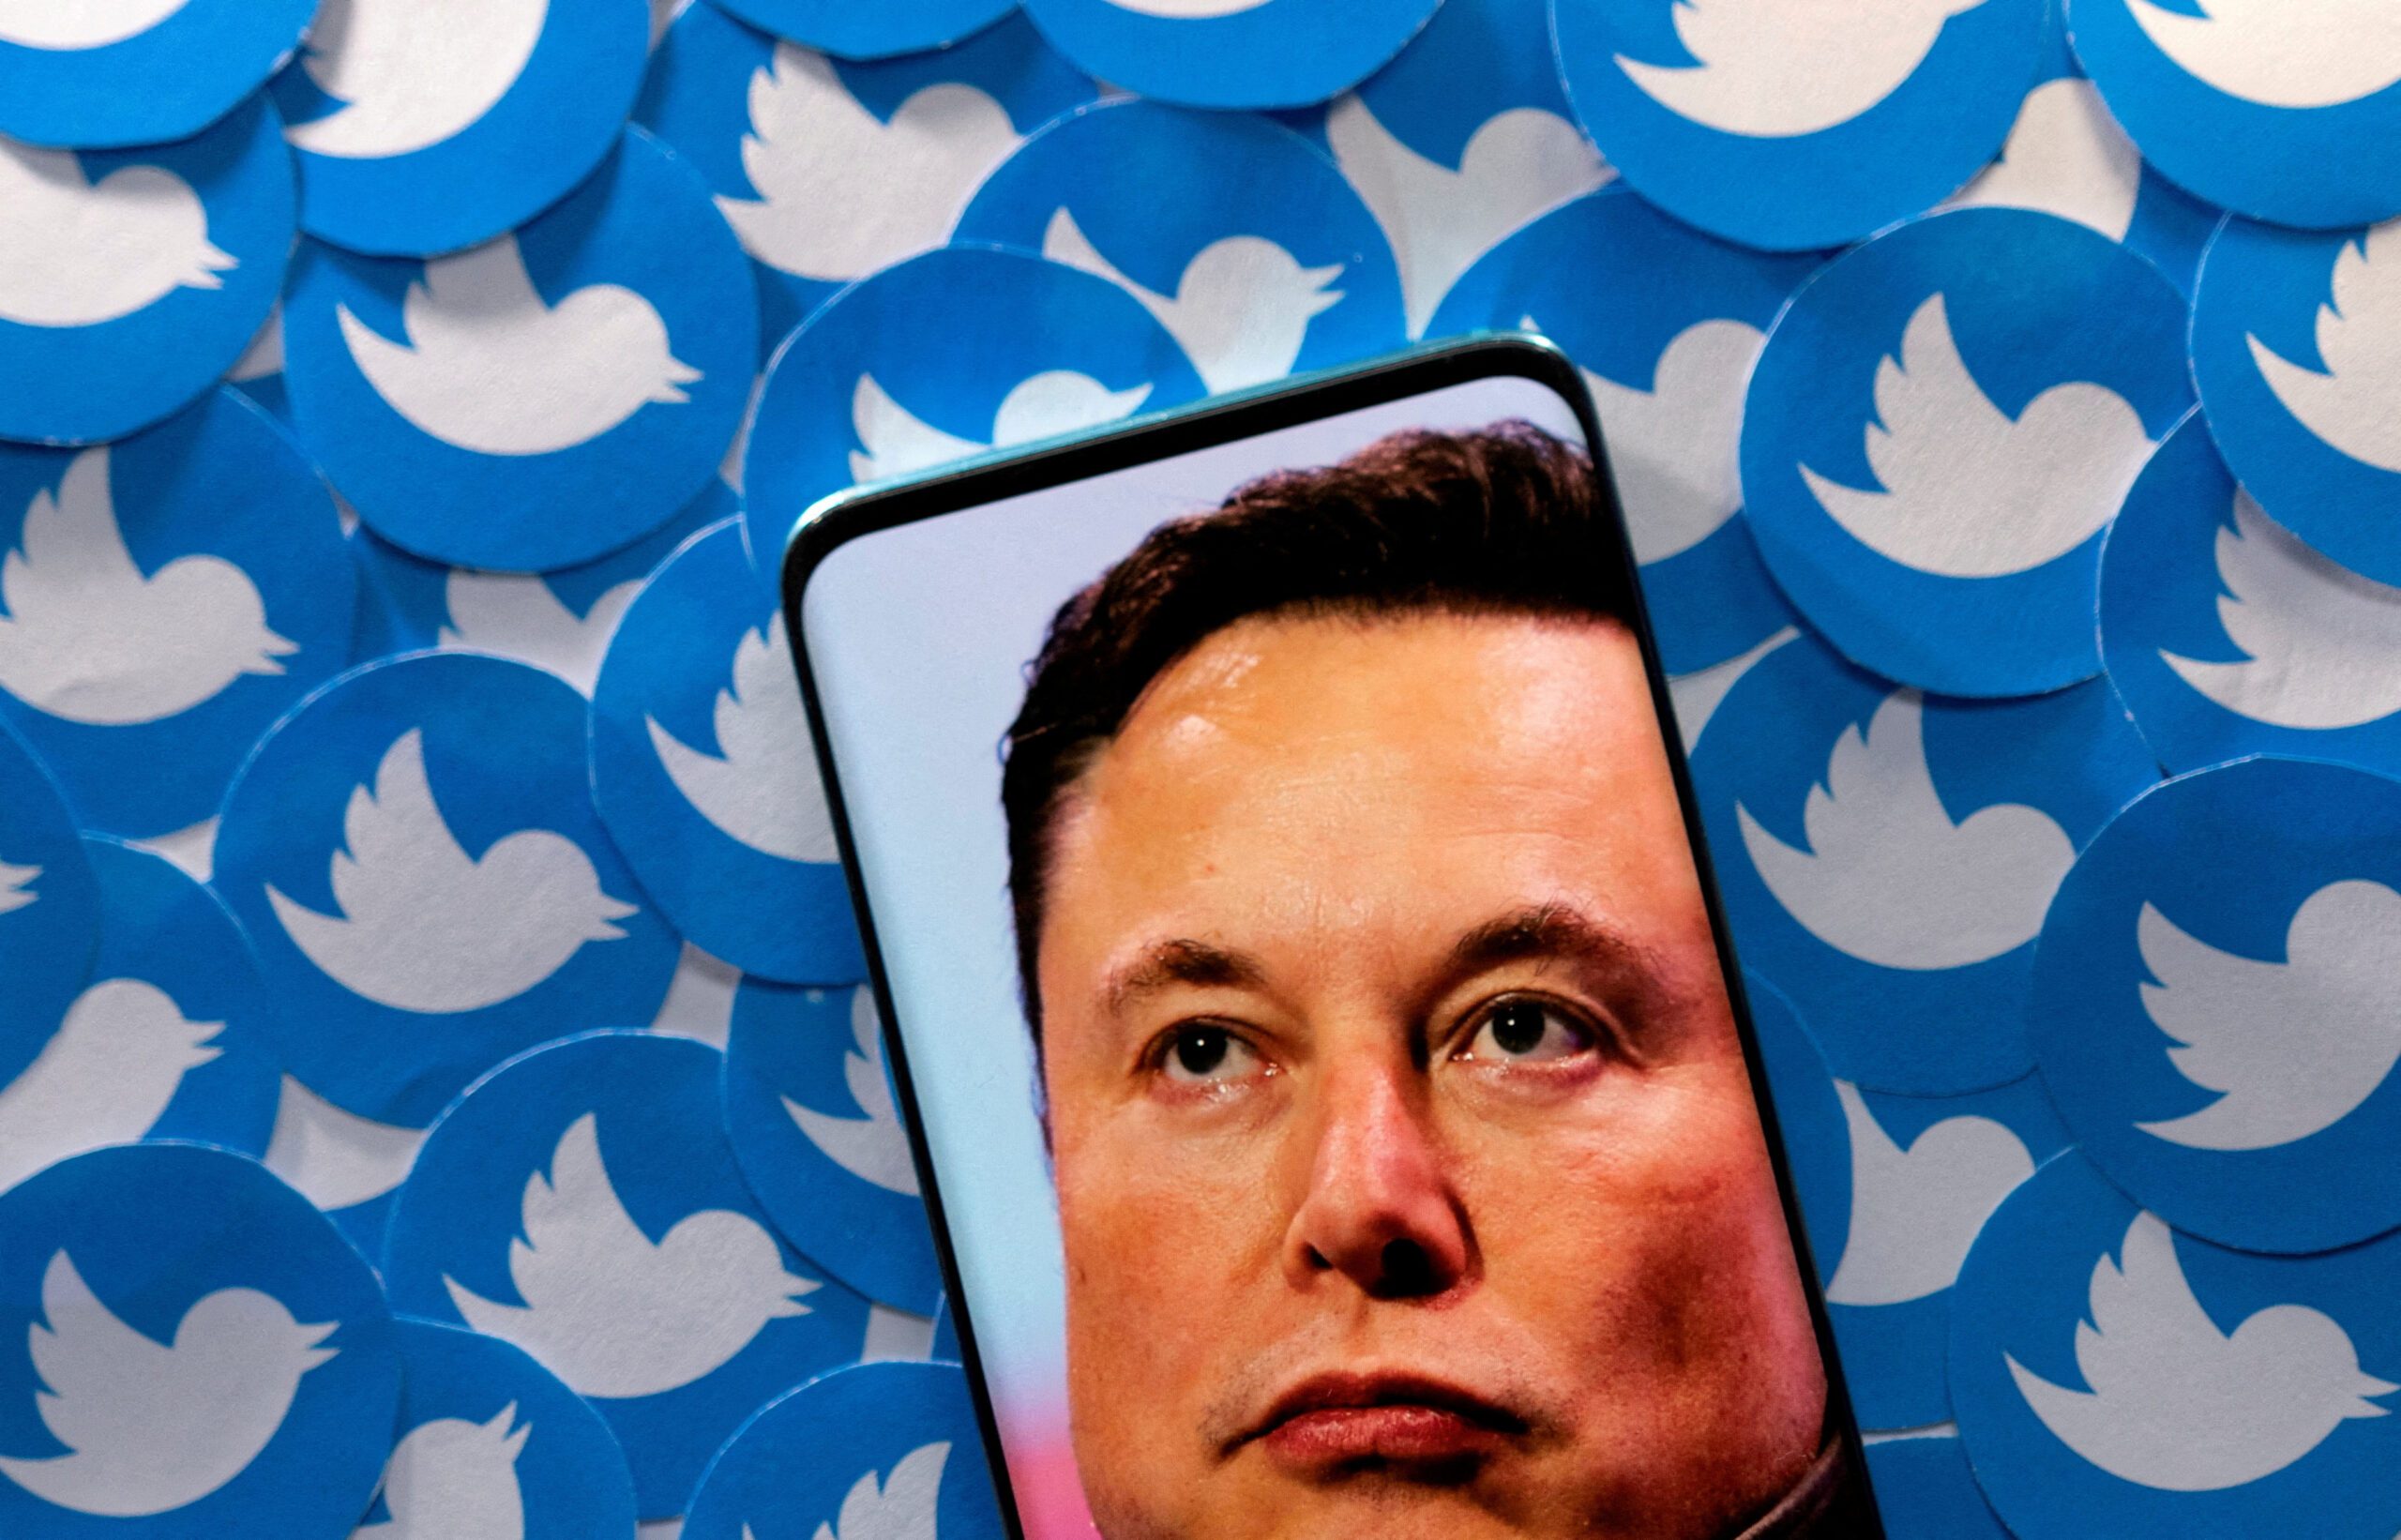 Elon Musk restores Twitter accounts of journalists after suspensions draw backlash